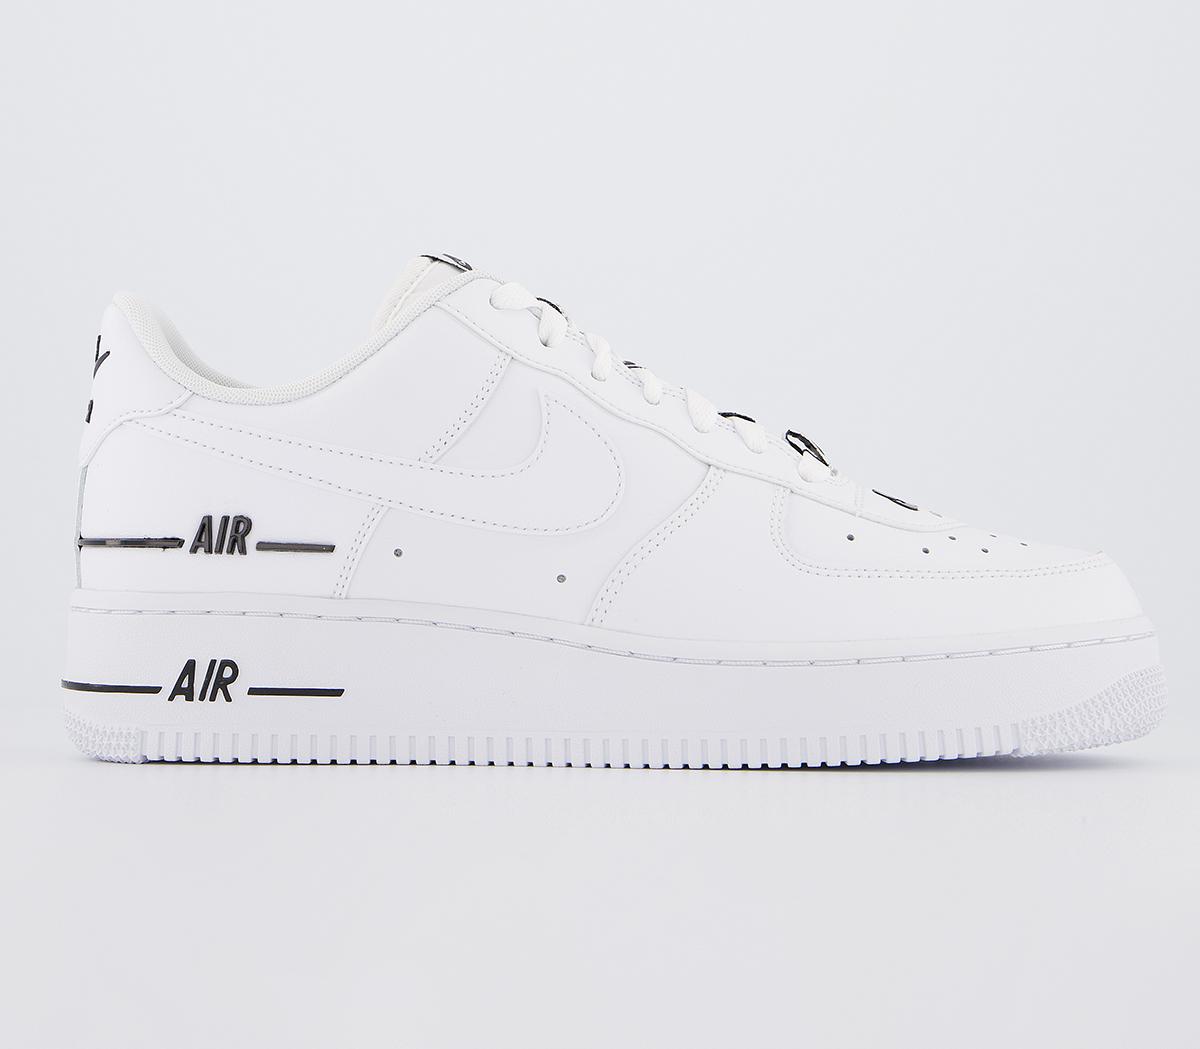 white & black air force 1 lv8 3 trainers